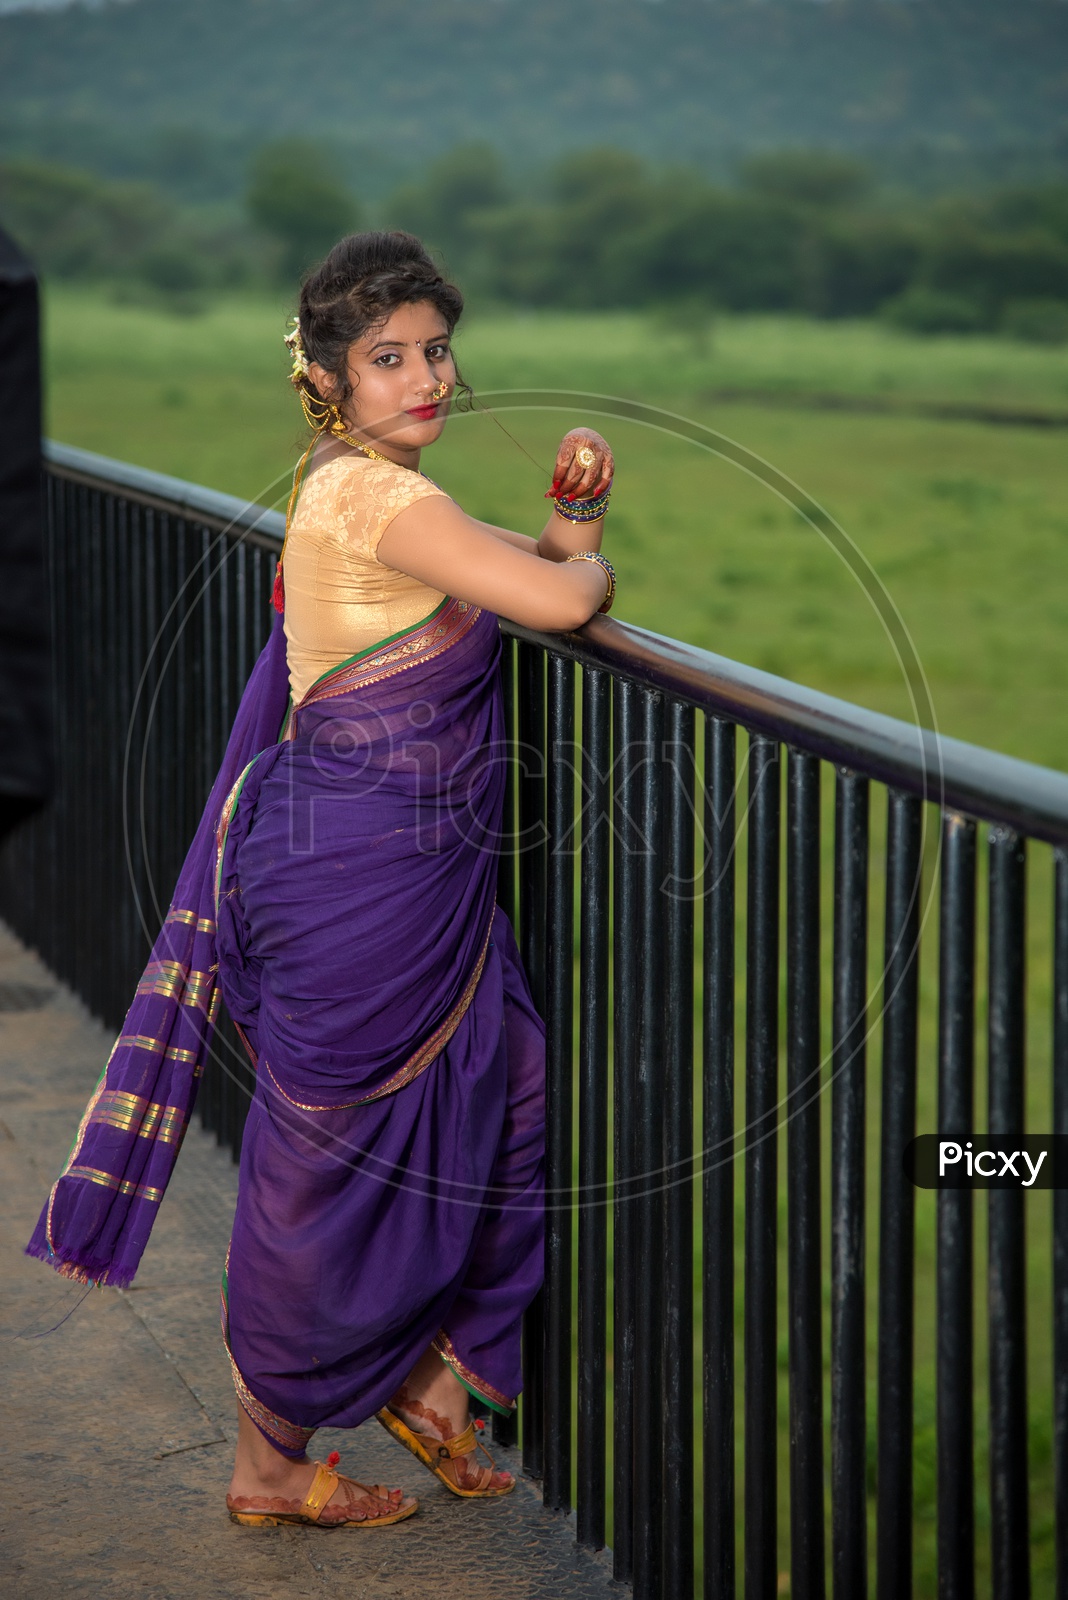 Poses in saree for outdoor photography Stock Photos - Page 1 : Masterfile